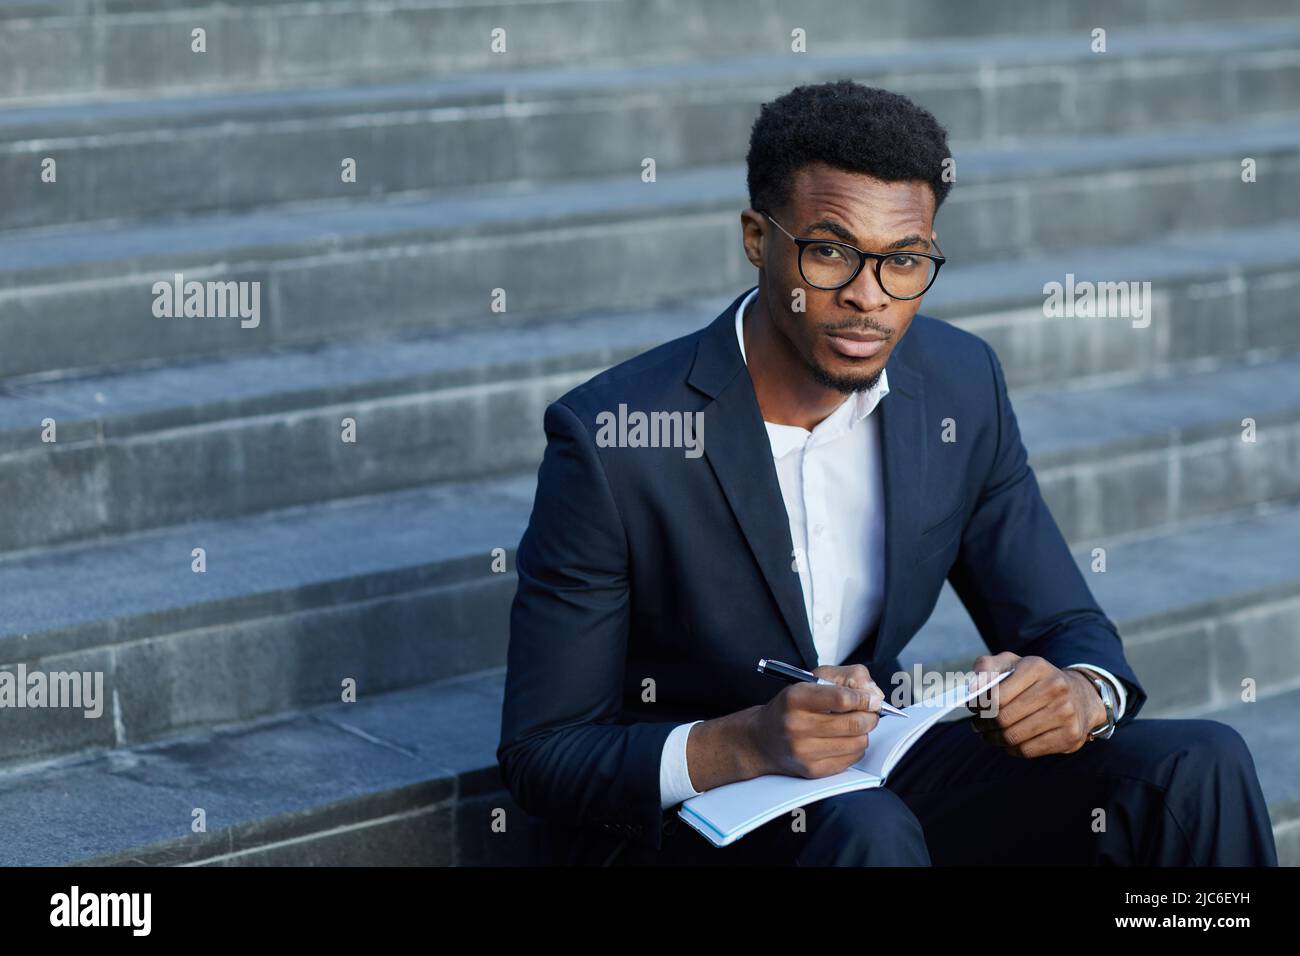 Serious thoughtful young Afro-American business school student with furrowing forehead sitting on staircase and making note in notepad Stock Photo